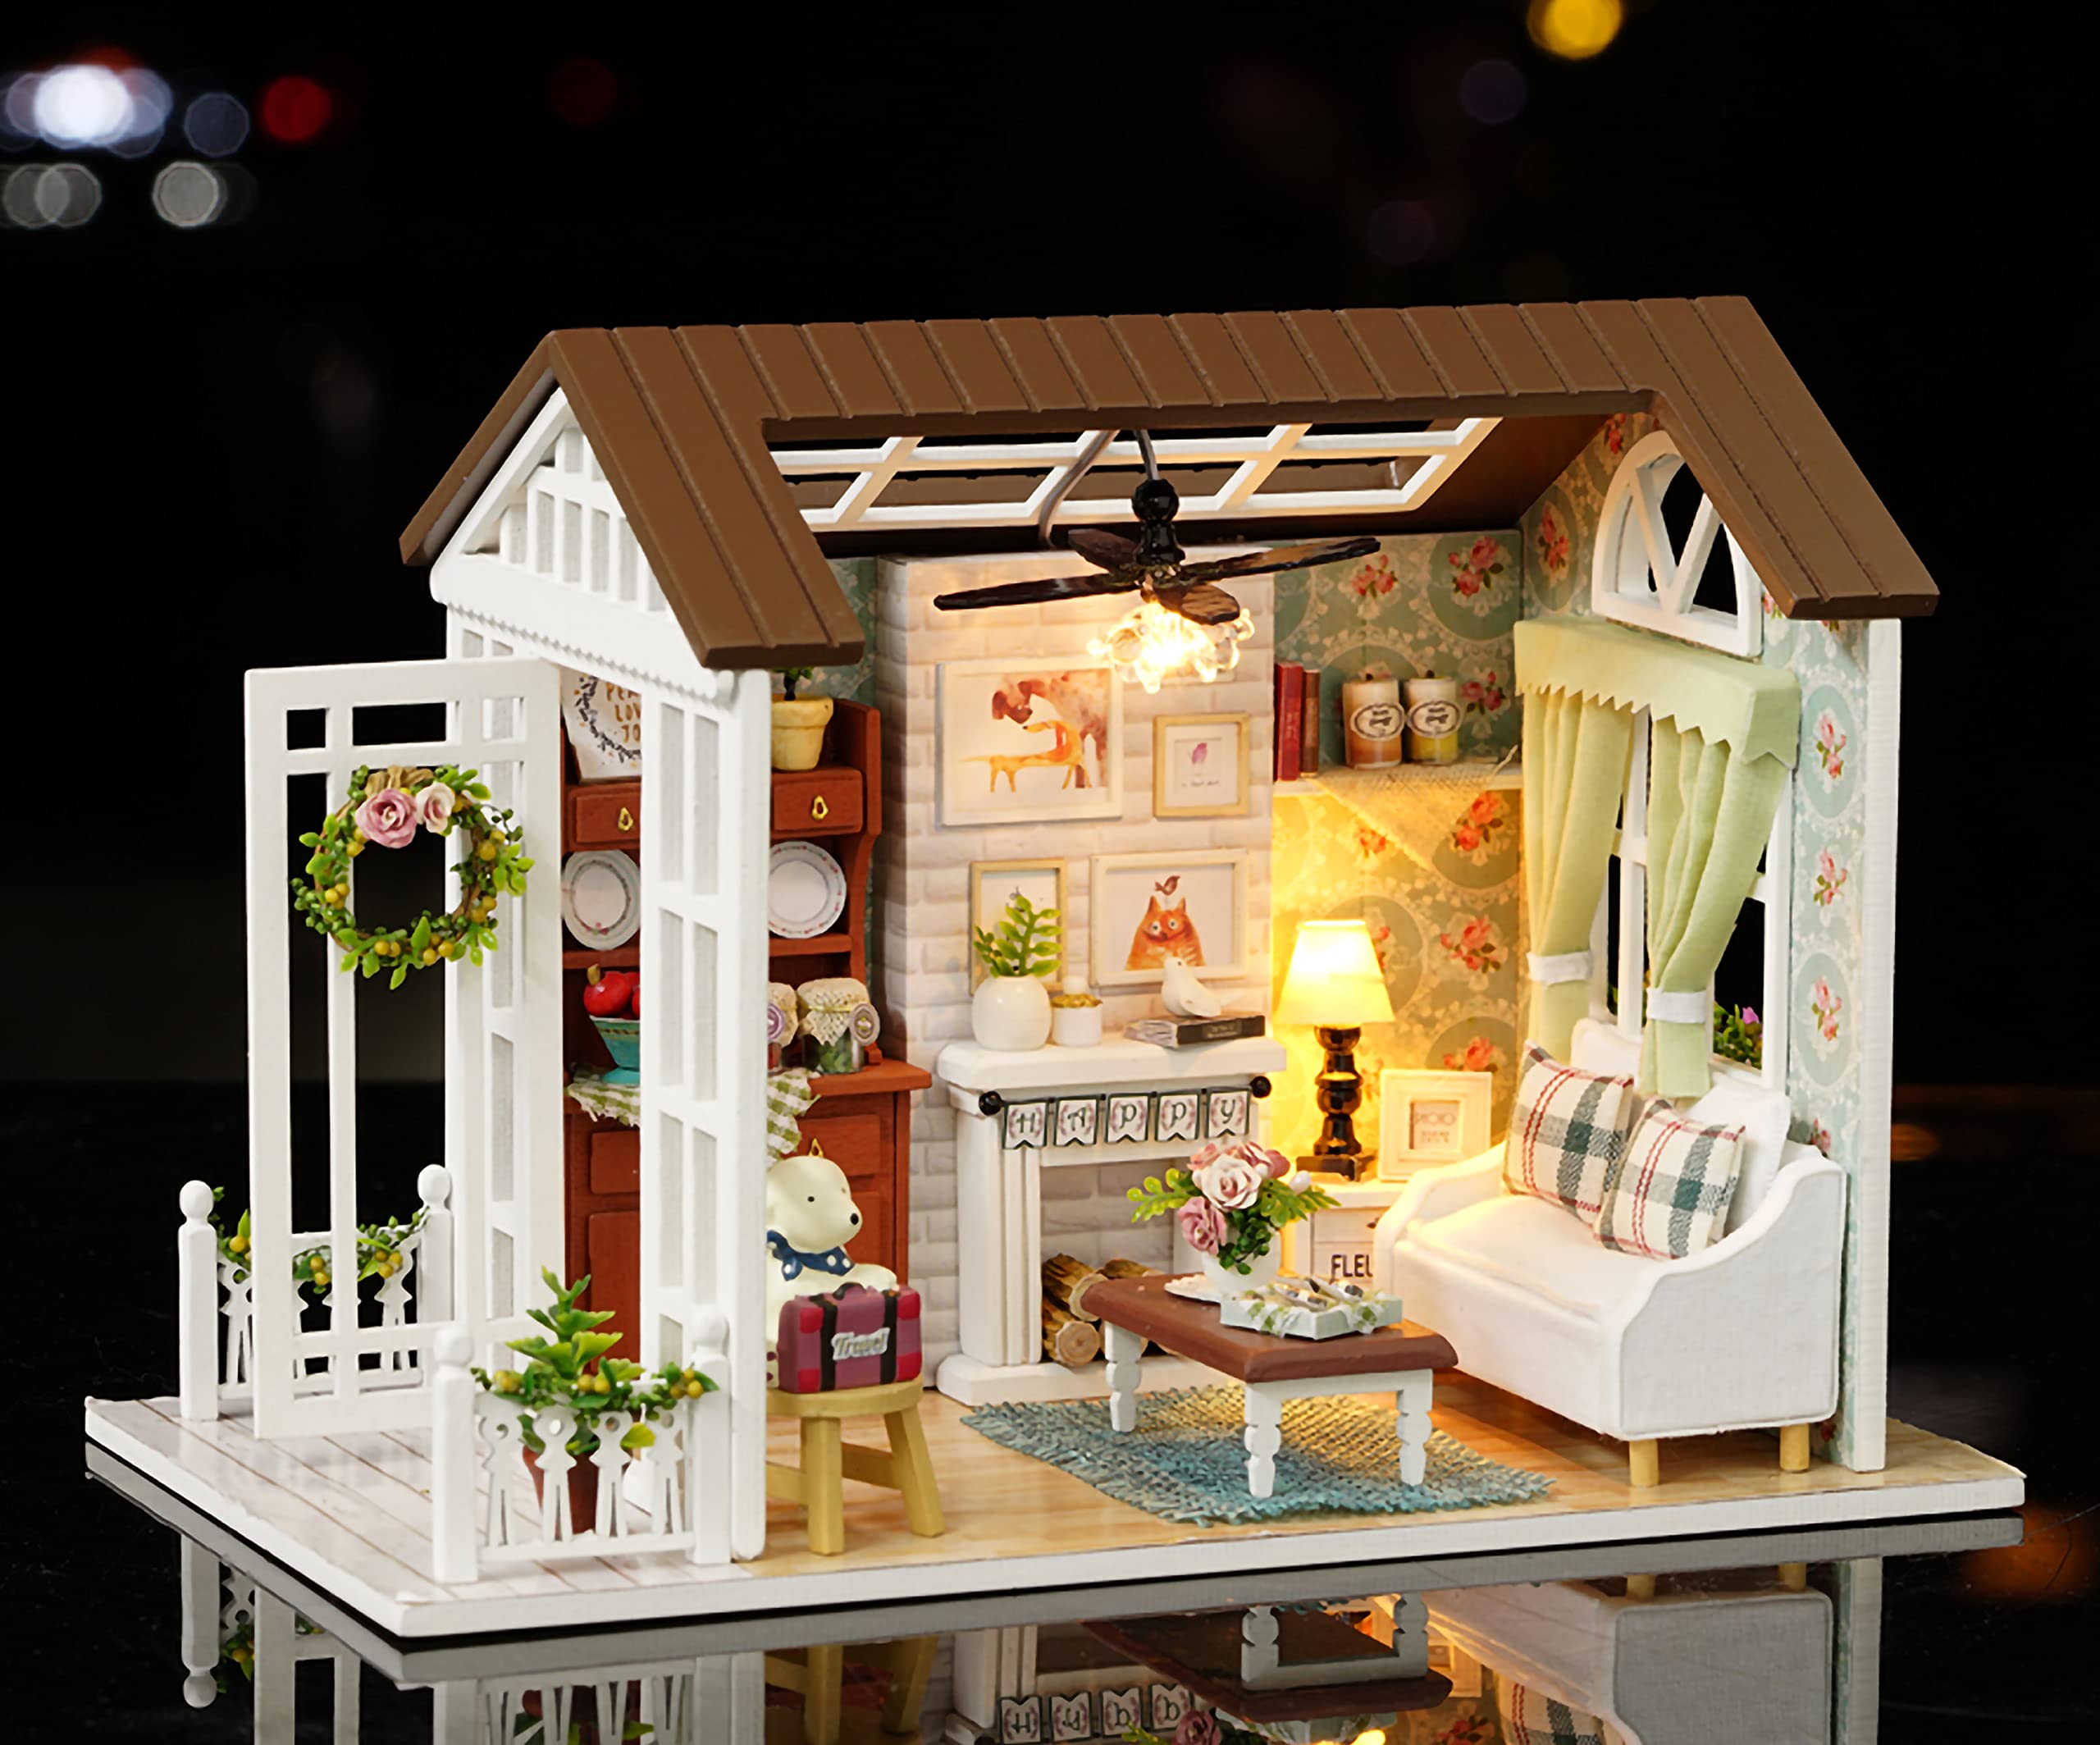 DIY Miniature Dollhouse Kit with Music Box Rylai 3D Puzzle Challenge for Adult Kids Xmas Gifts Z008